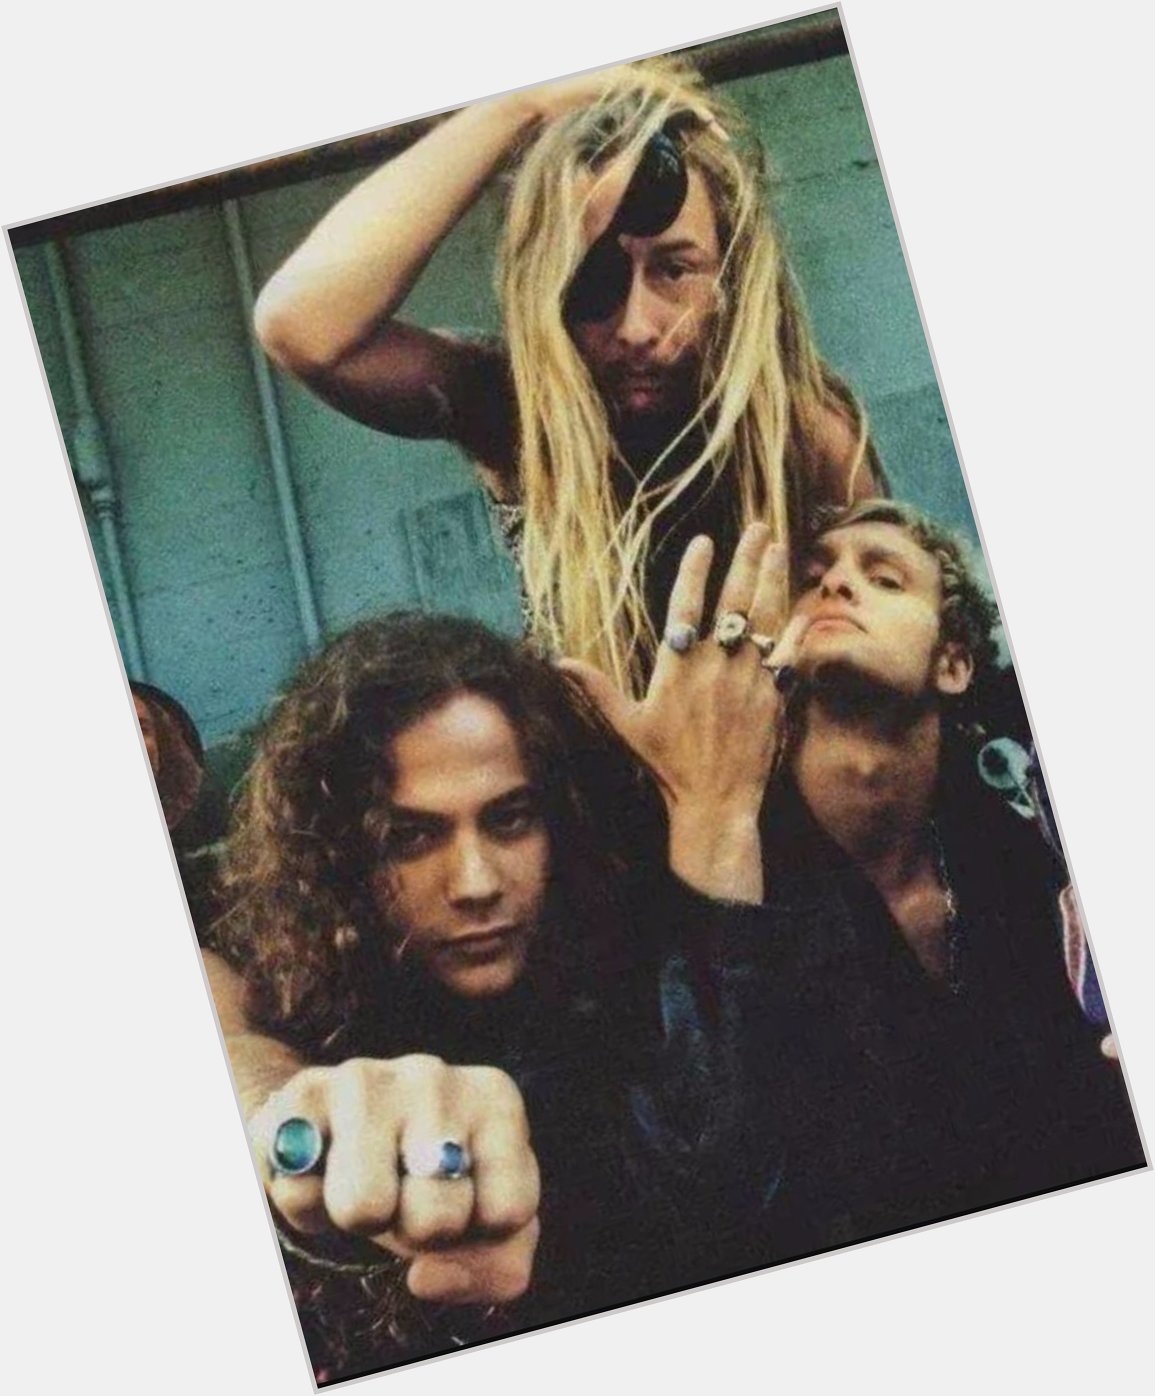  RIP Layne and Happy Birthday Mike Starr. You both are so missed 